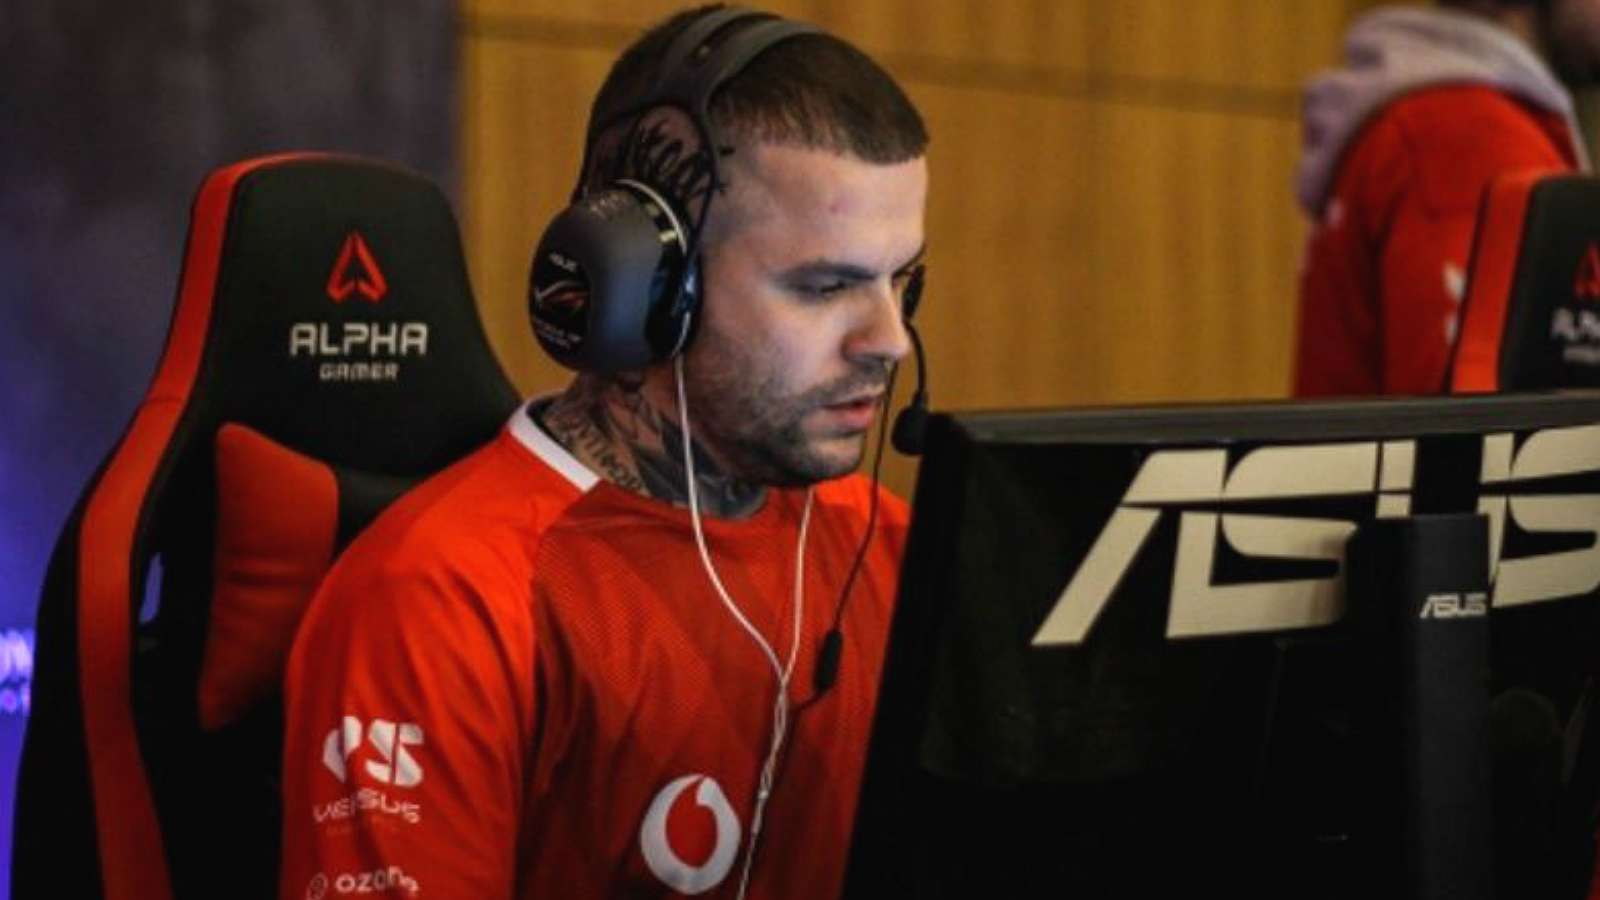 Fox playing CSGO for Vodafone Giants in red jersey